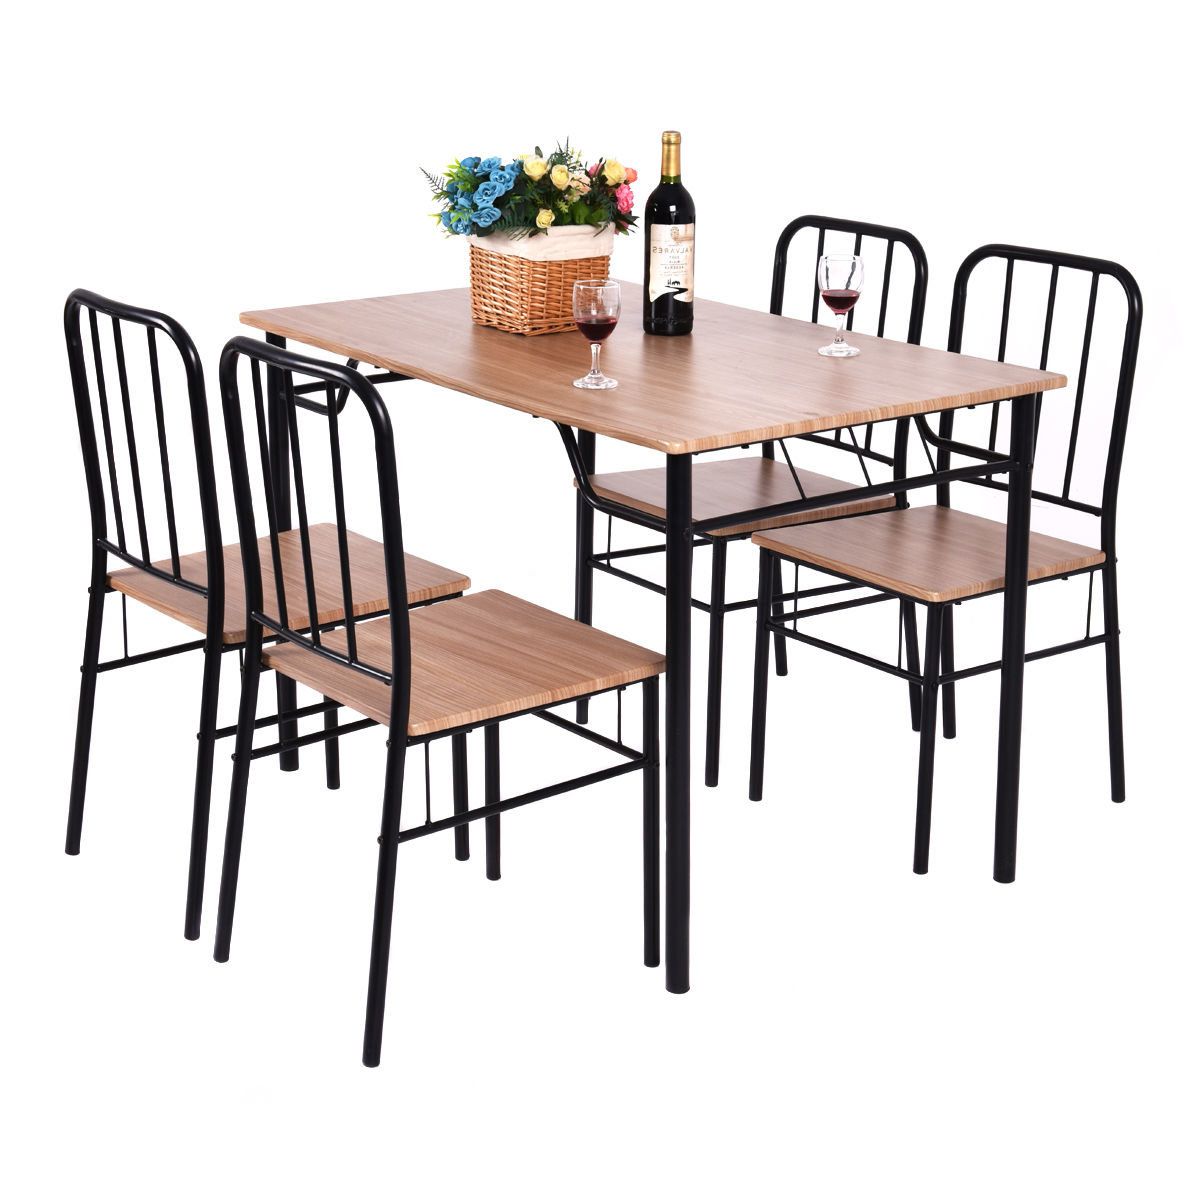 Widely Used Conover 5 Piece Dining Sets With Conover 5 Piece Dining Set (View 1 of 20)